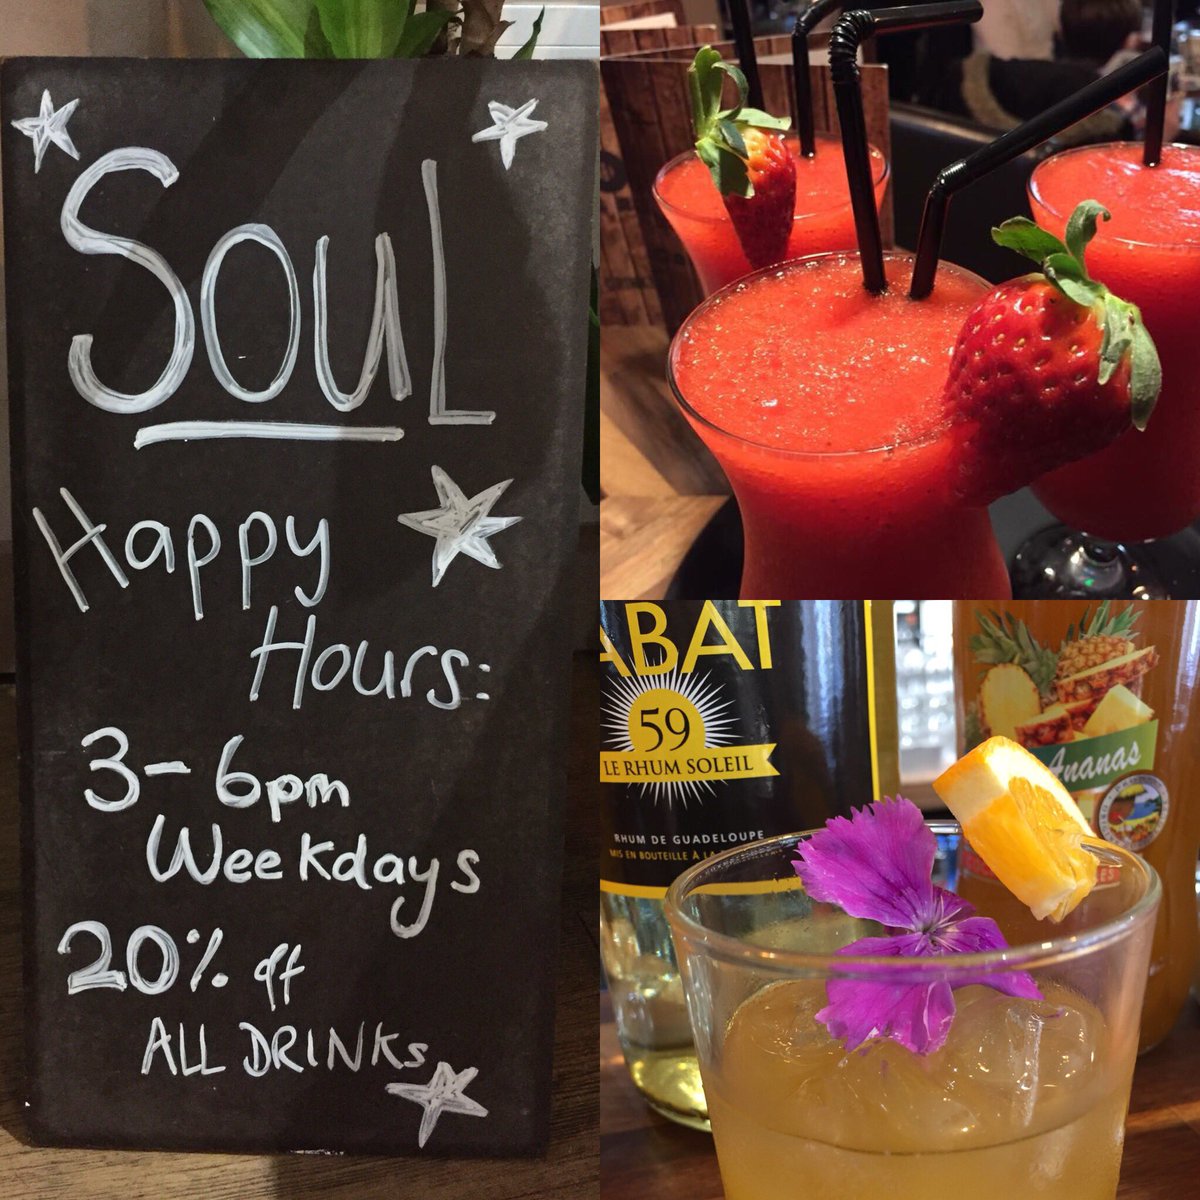 🍹🍻🏝SOUL Happy Hours are now: 3-6pm - Every Weekday - 20% off ALL drinks!! 🍸🍾😍.... come and enjoy a some cocktails, fine wines, cool beers and while away those lazy August afternoons 😎#livelifewithsoul #kingslynn #happyhours #cocktails #augustkingslynn #discoverkingslynn